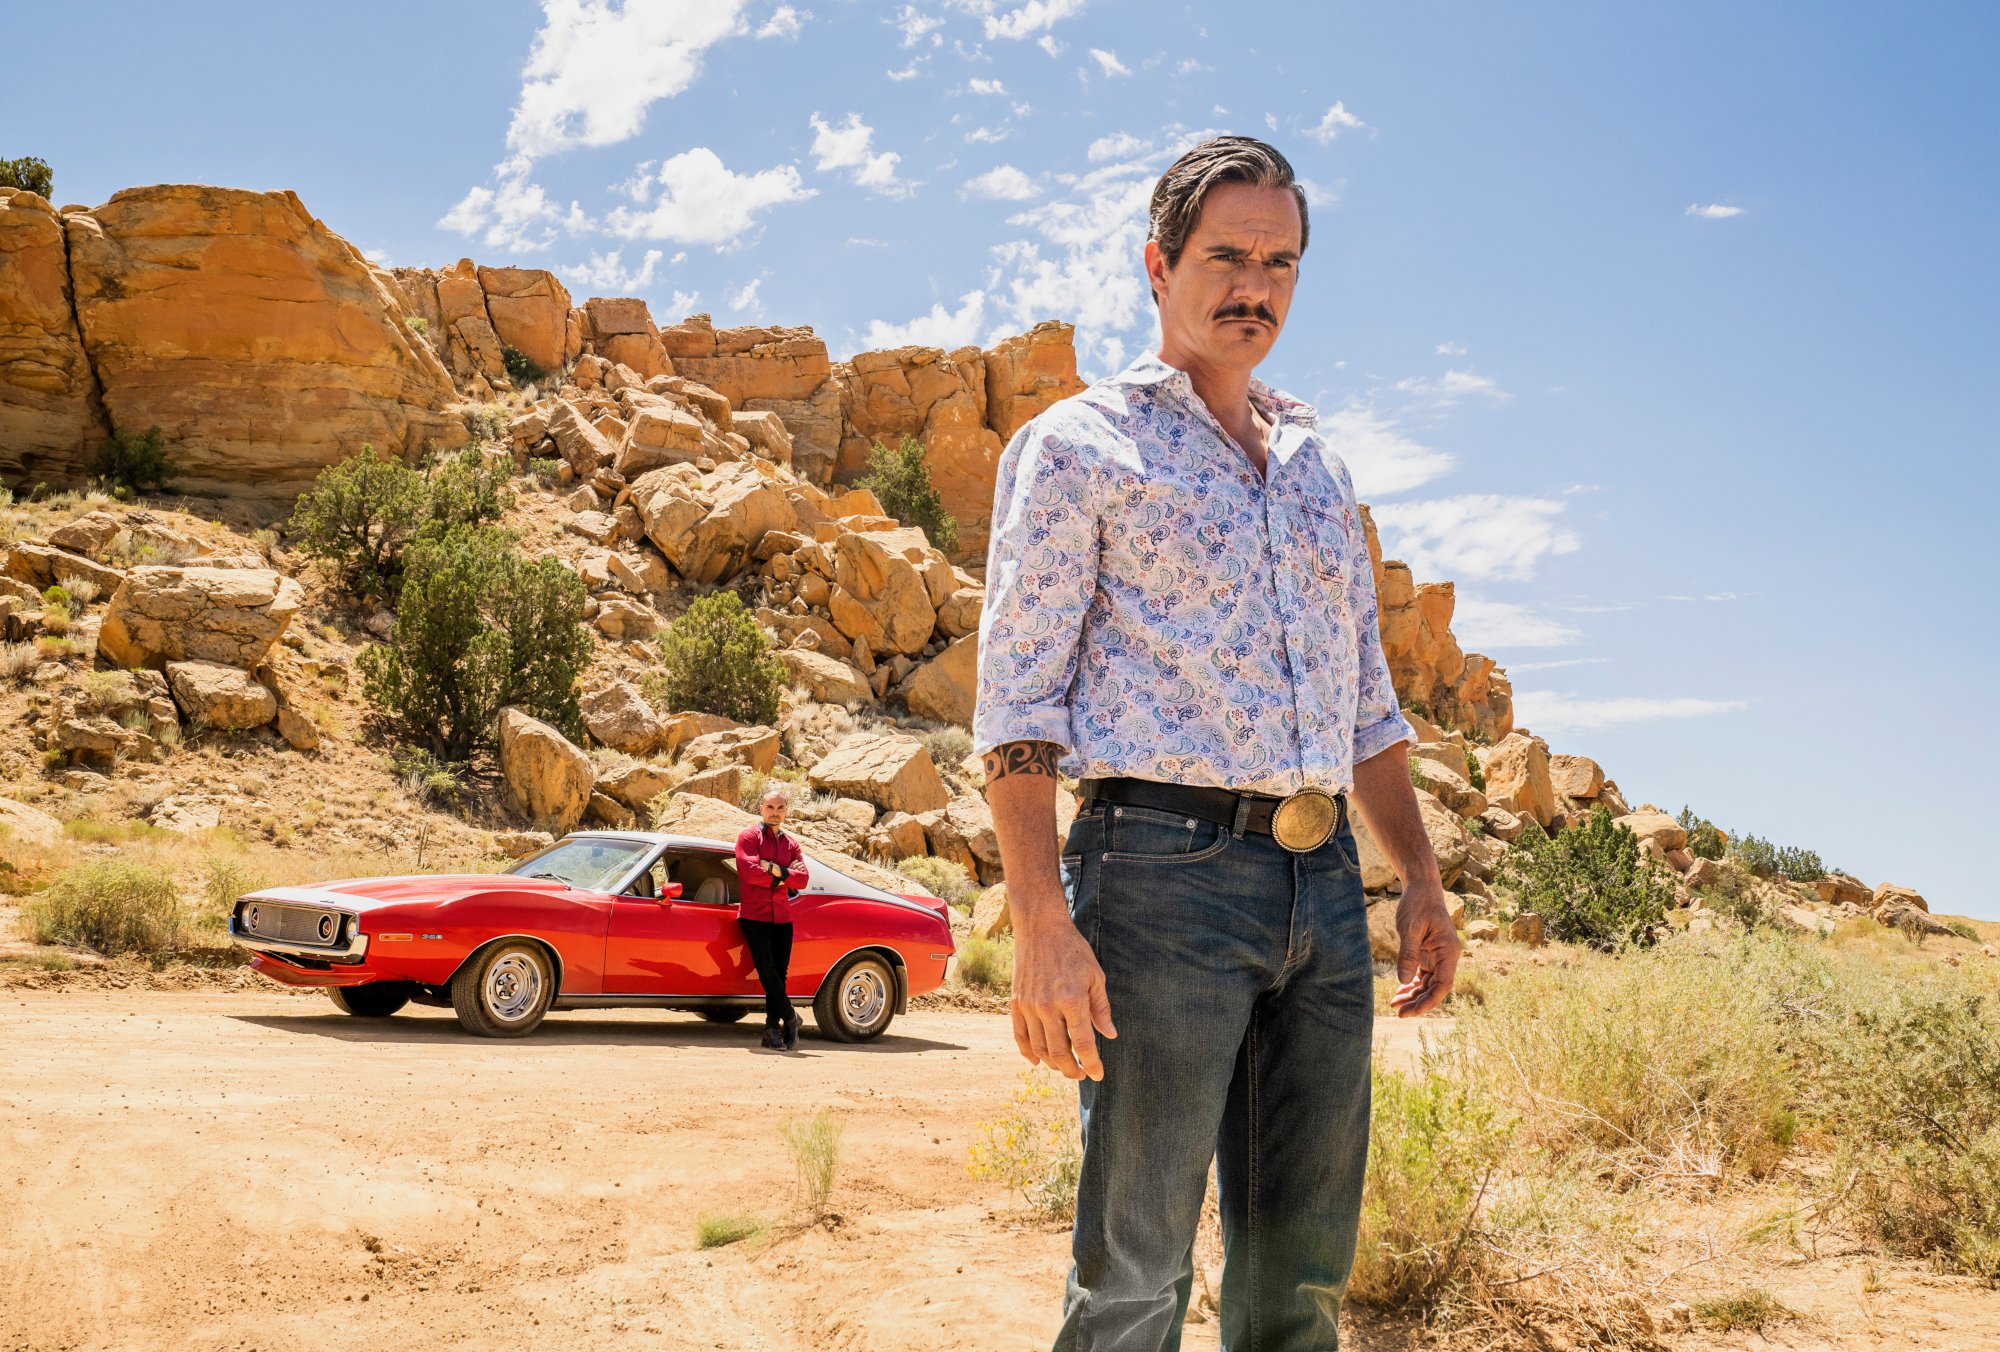 'Better Call Saul' star Tony Dalton as Lalo Salamanca - He's standing in a desert with a red car behind him. Michael Mando is leaning against the car, playing Nacho Varga.